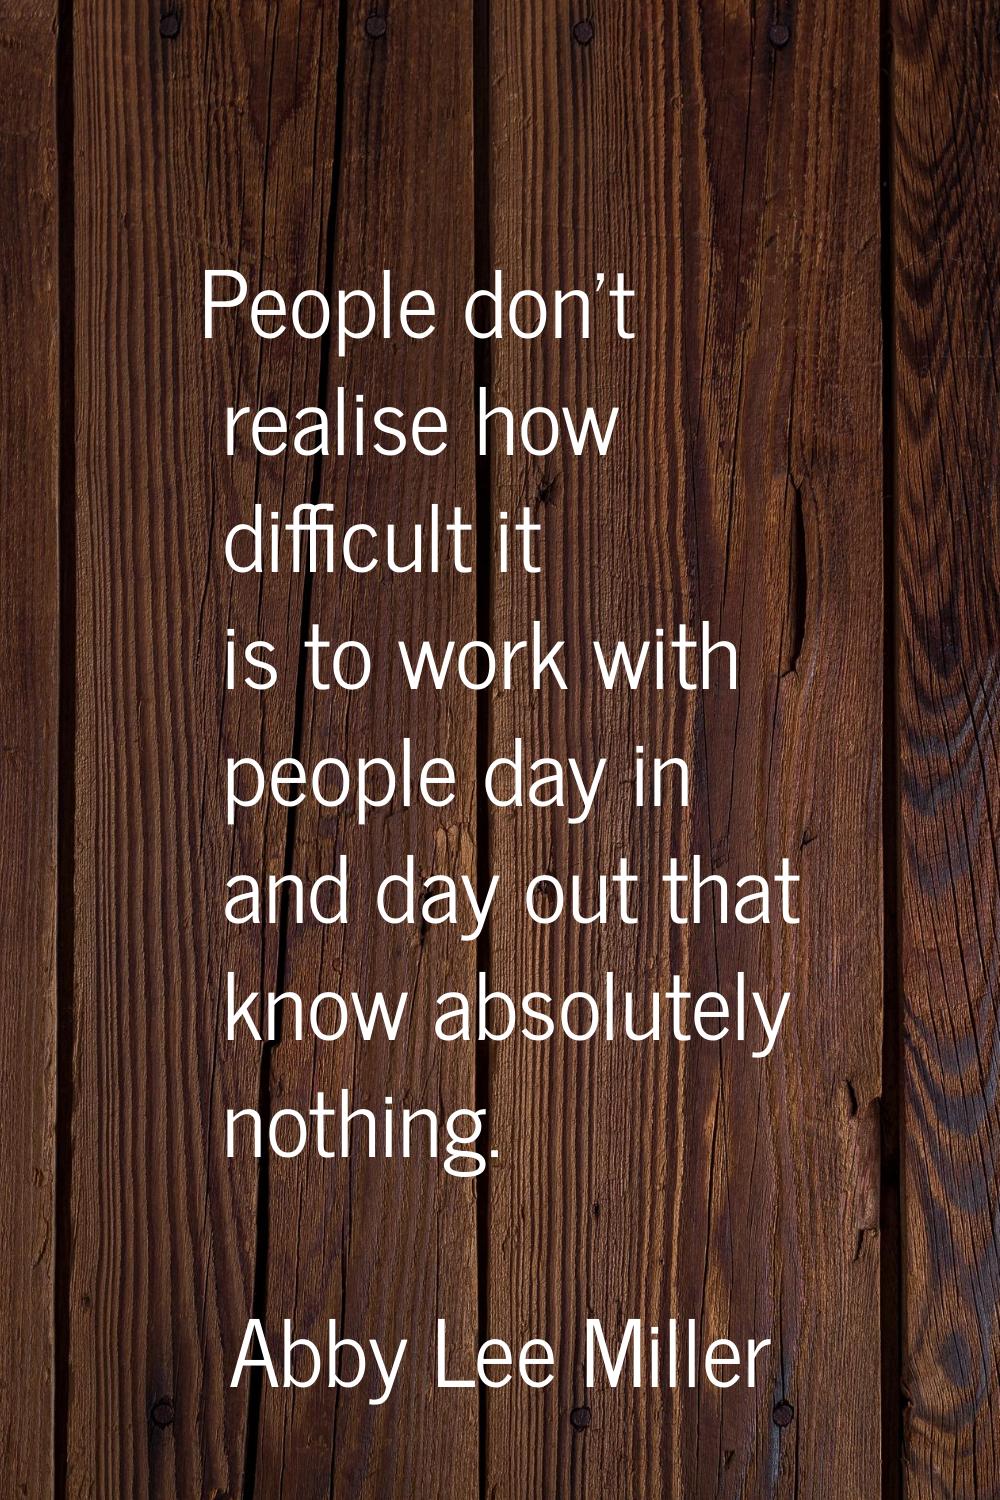 People don't realise how difficult it is to work with people day in and day out that know absolutel